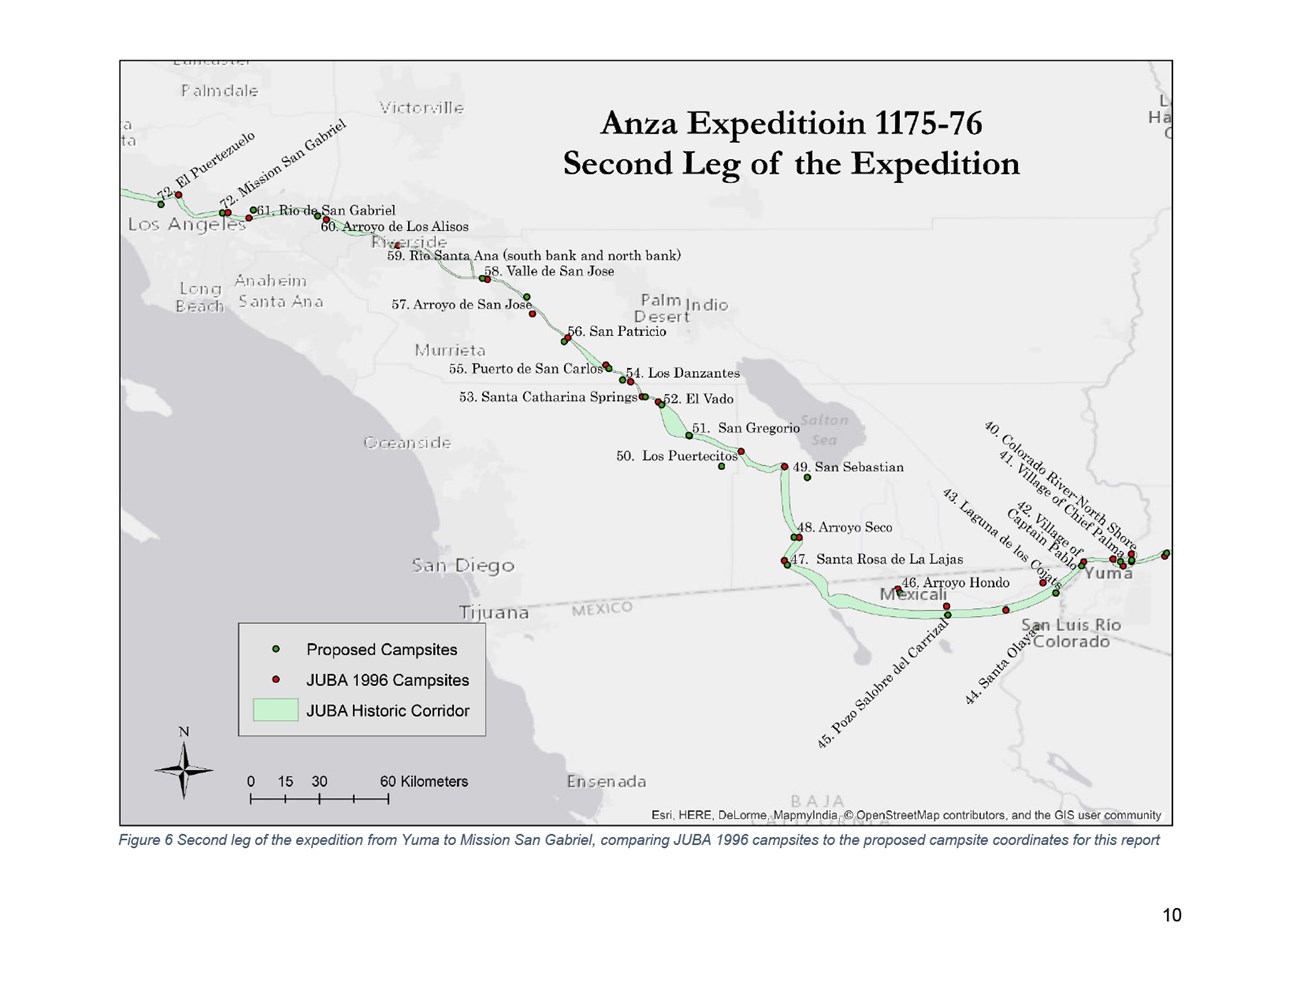 Map of the Second Leg of the Expedition